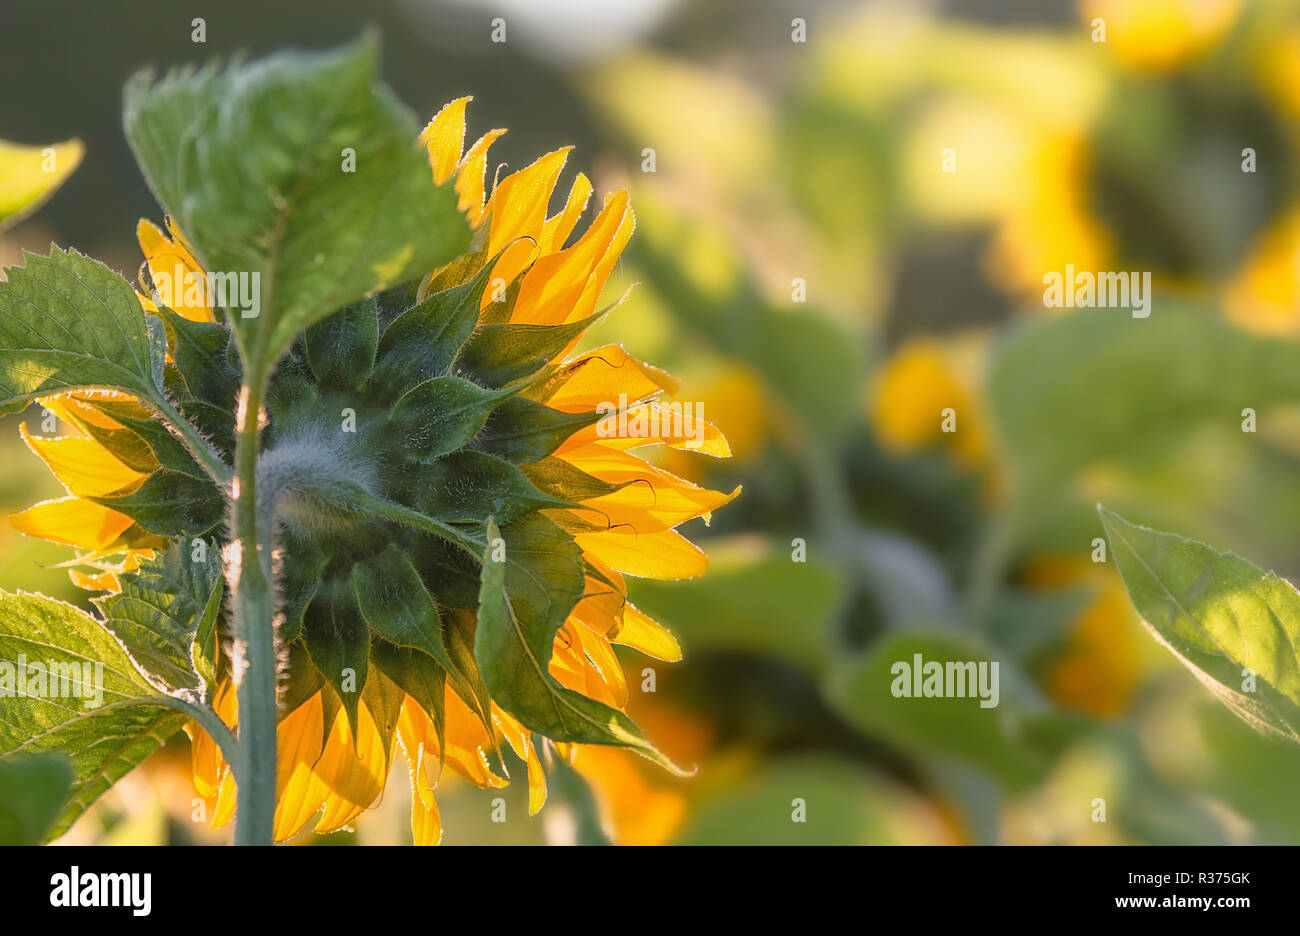 Sunflowers in the warm sunlight in the early morning Stock Photo